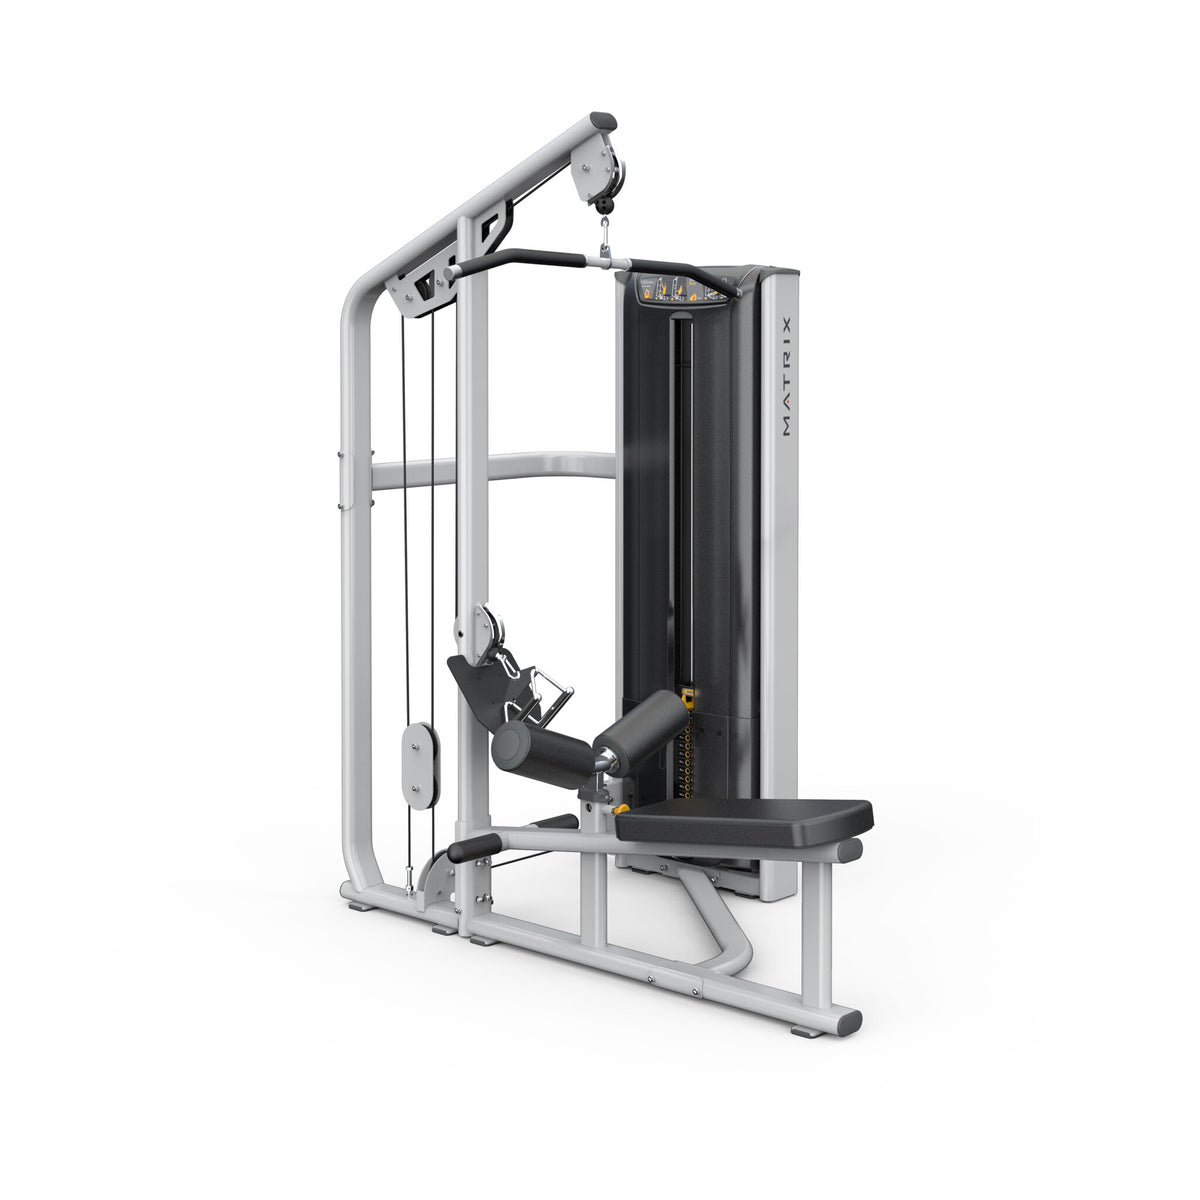 Versa Lat Pulldown/ Seated Row full view | Fitness Experience